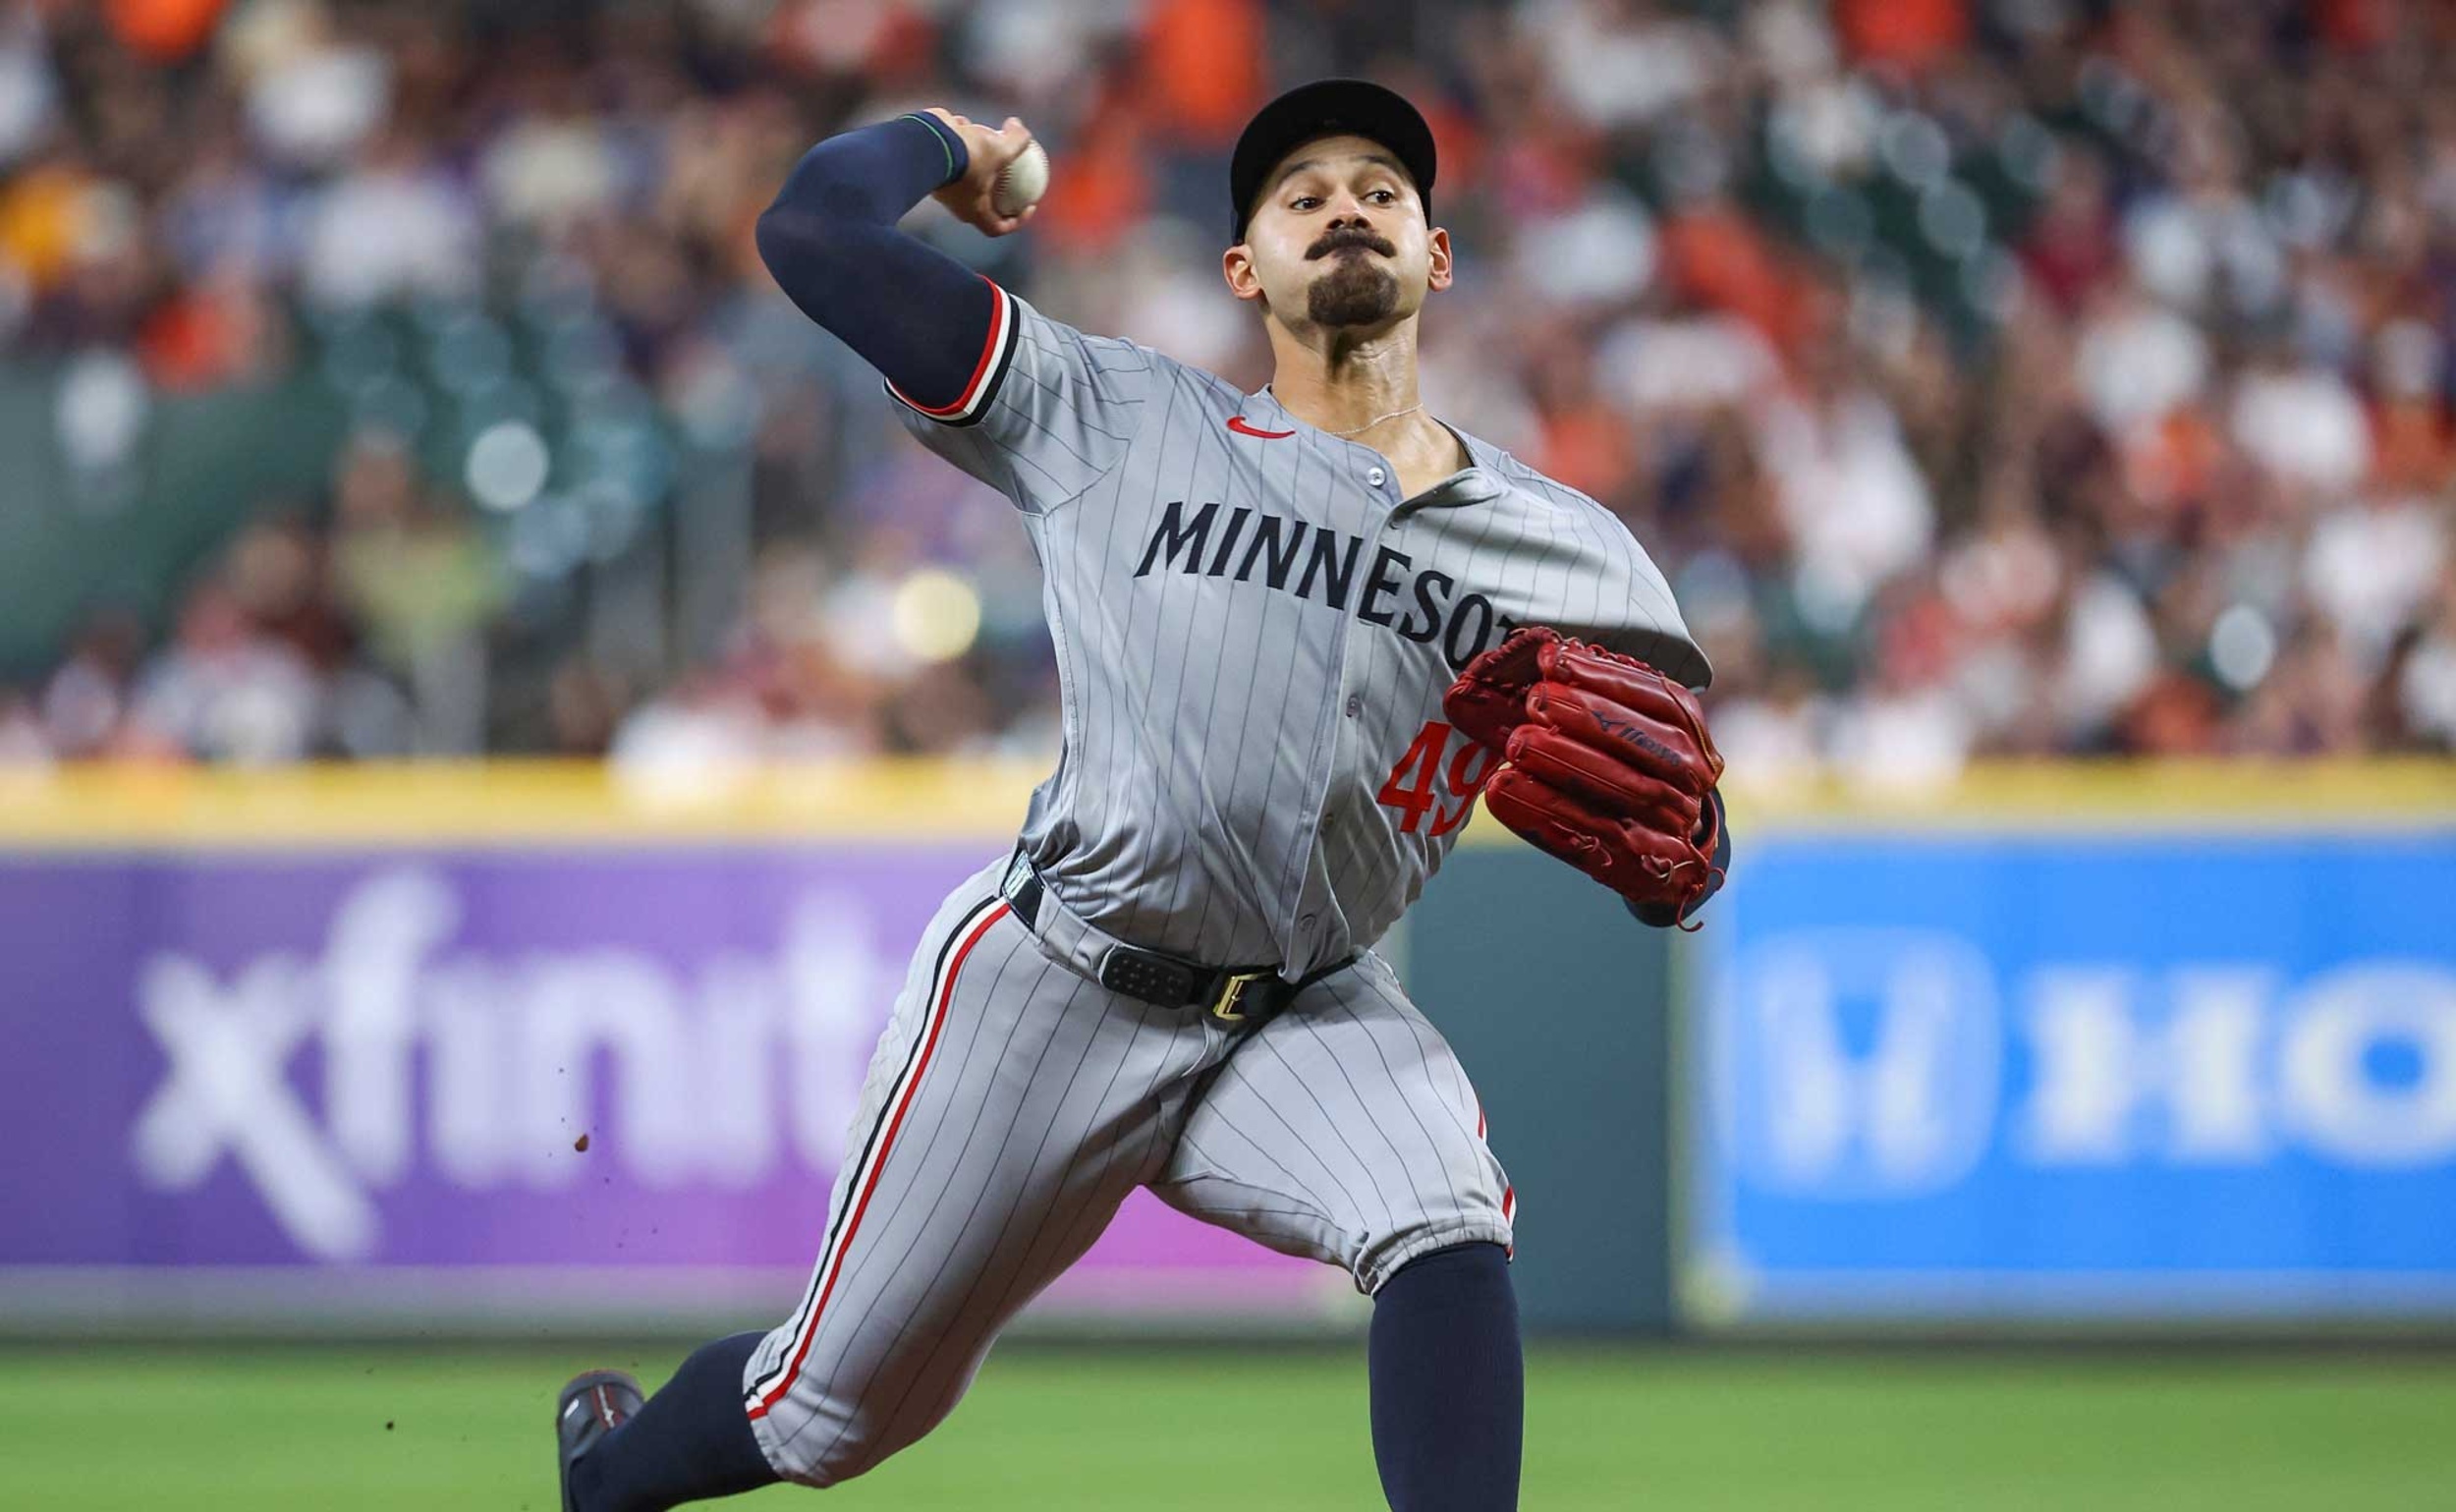 <p>Lopez emerged as an ace for the Twins last season, going 11-8 with a 3.66 ERA in 32 starts. His start to this season isn't going as well, with a 5.45 ERA over 13 starts. The good news is that his excellent command has held, so there are signs Lopez will get back on track.</p><p>You may also like: <a href='https://www.yardbarker.com/mlb/articles/the_most_overpaid_underpaid_players_at_every_mlb_position/s1__40036063'>The most overpaid & underpaid players at every MLB position</a></p>